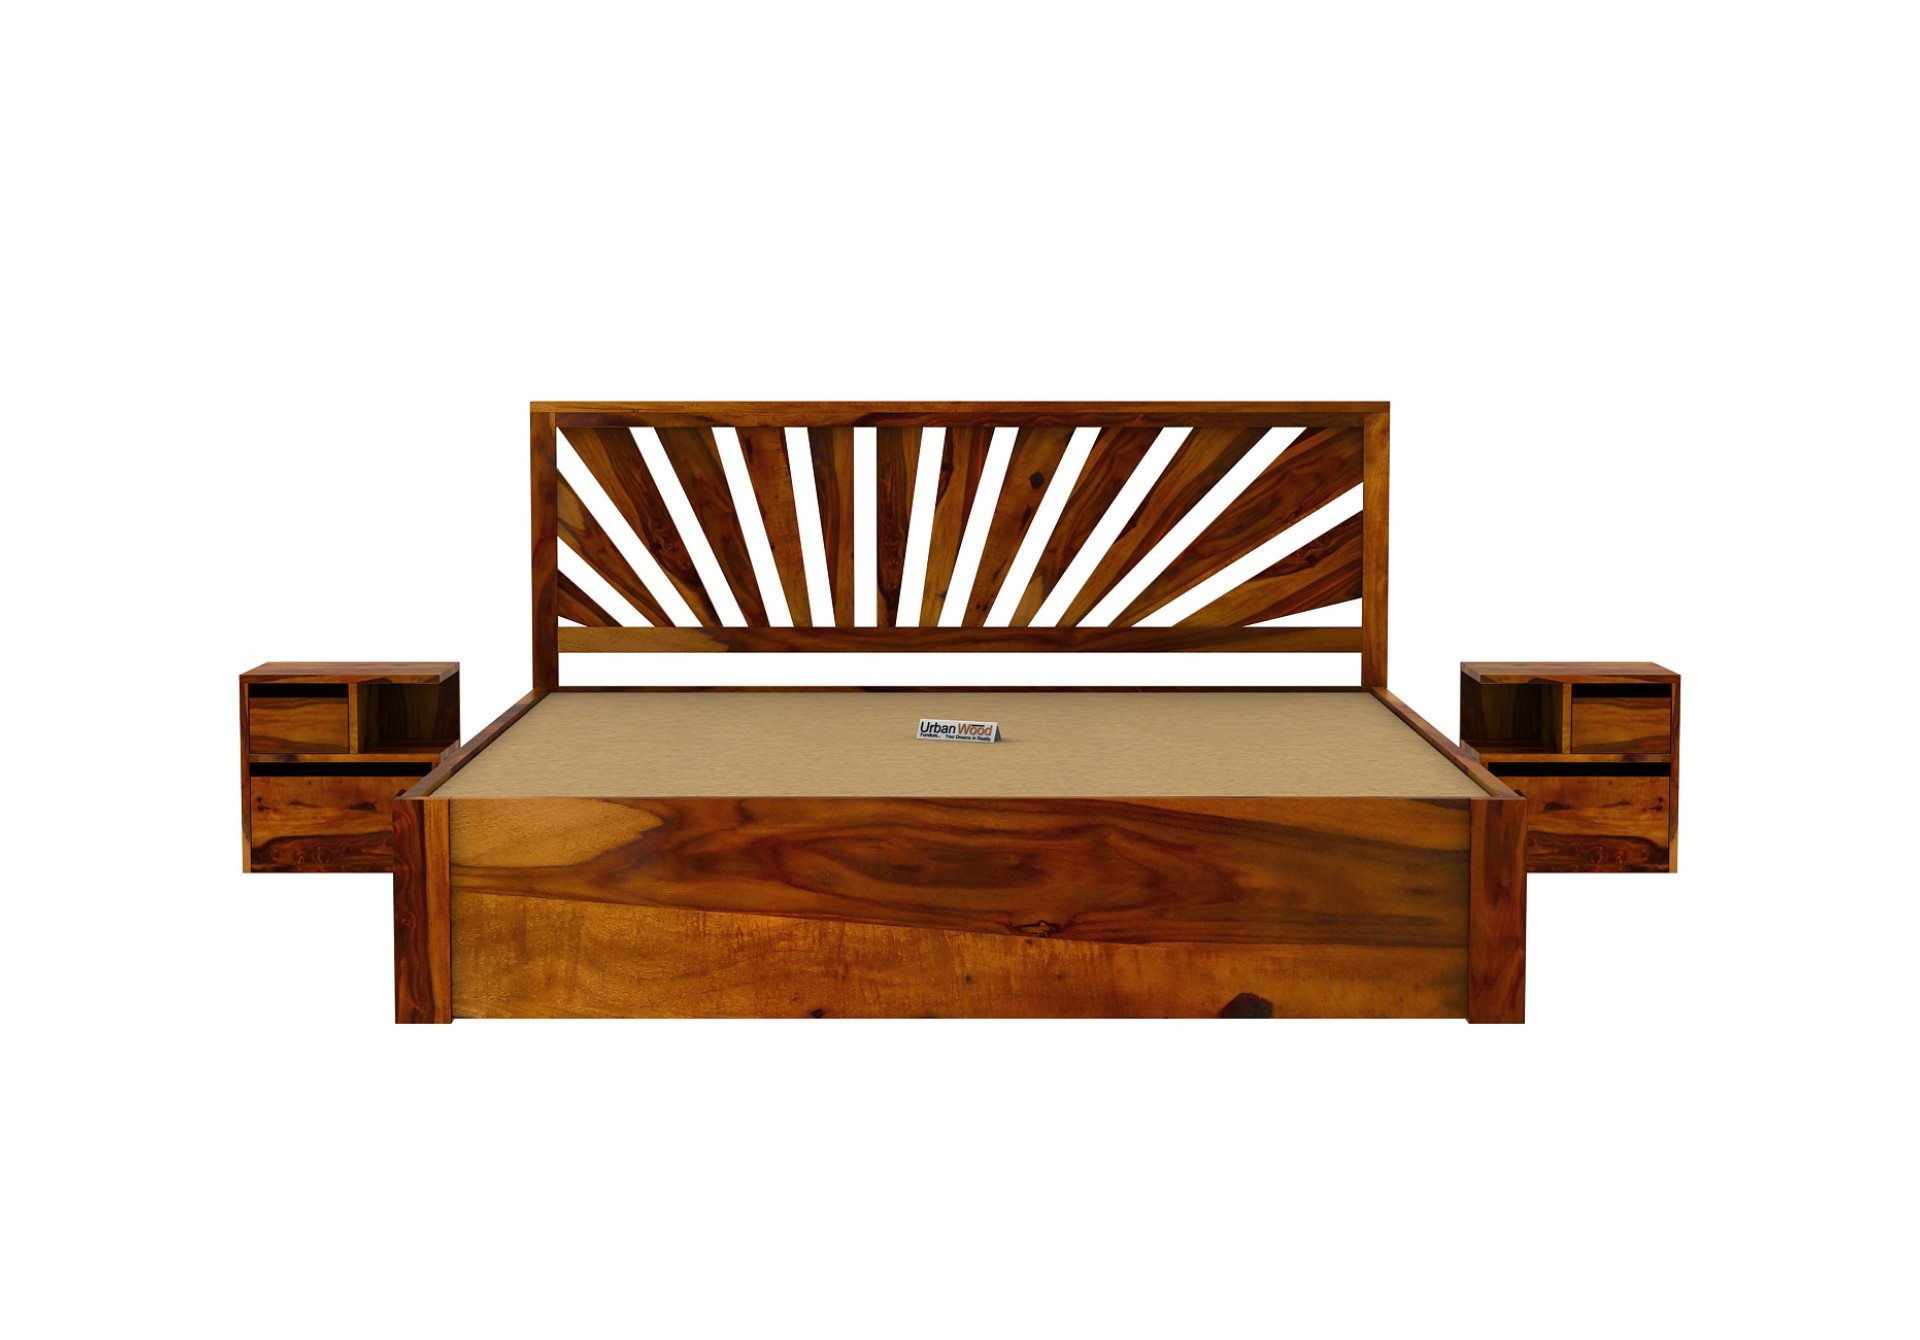 Jerry Wooden Hydraulic Bed Queen Size 